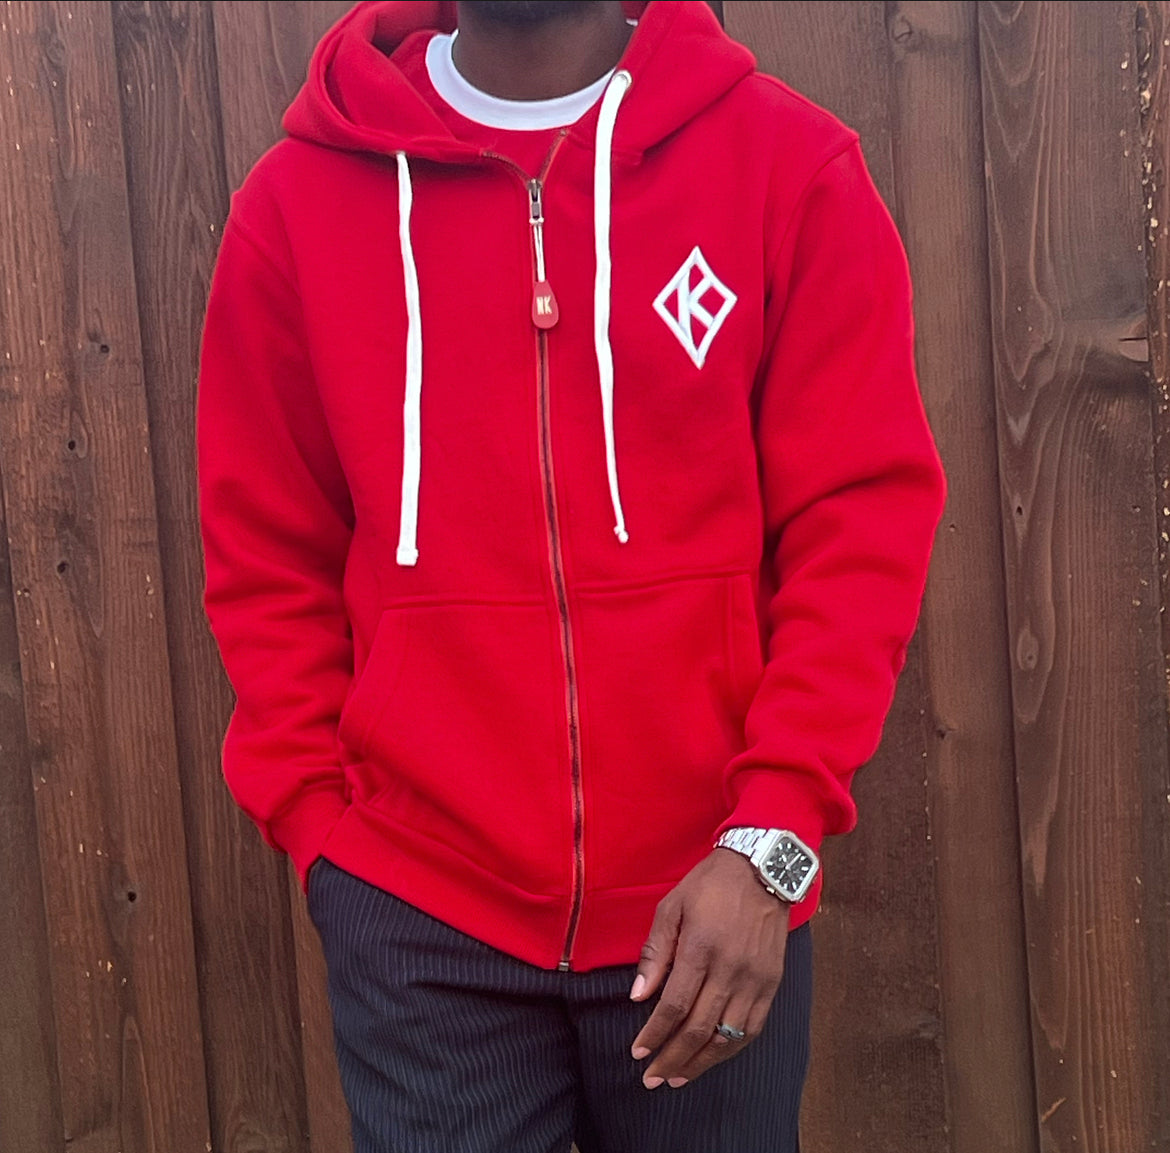 Introducing the Kappa alpha psi Floating K 3D Classic Hoodie, perfect for men who want to add some style to their active-wear collection. This hoodie is made by the popular brand Nupe Kave and is designed for ultimate comfort and durability. It features a 3D floating K design that makes it stand out from other hoodies.